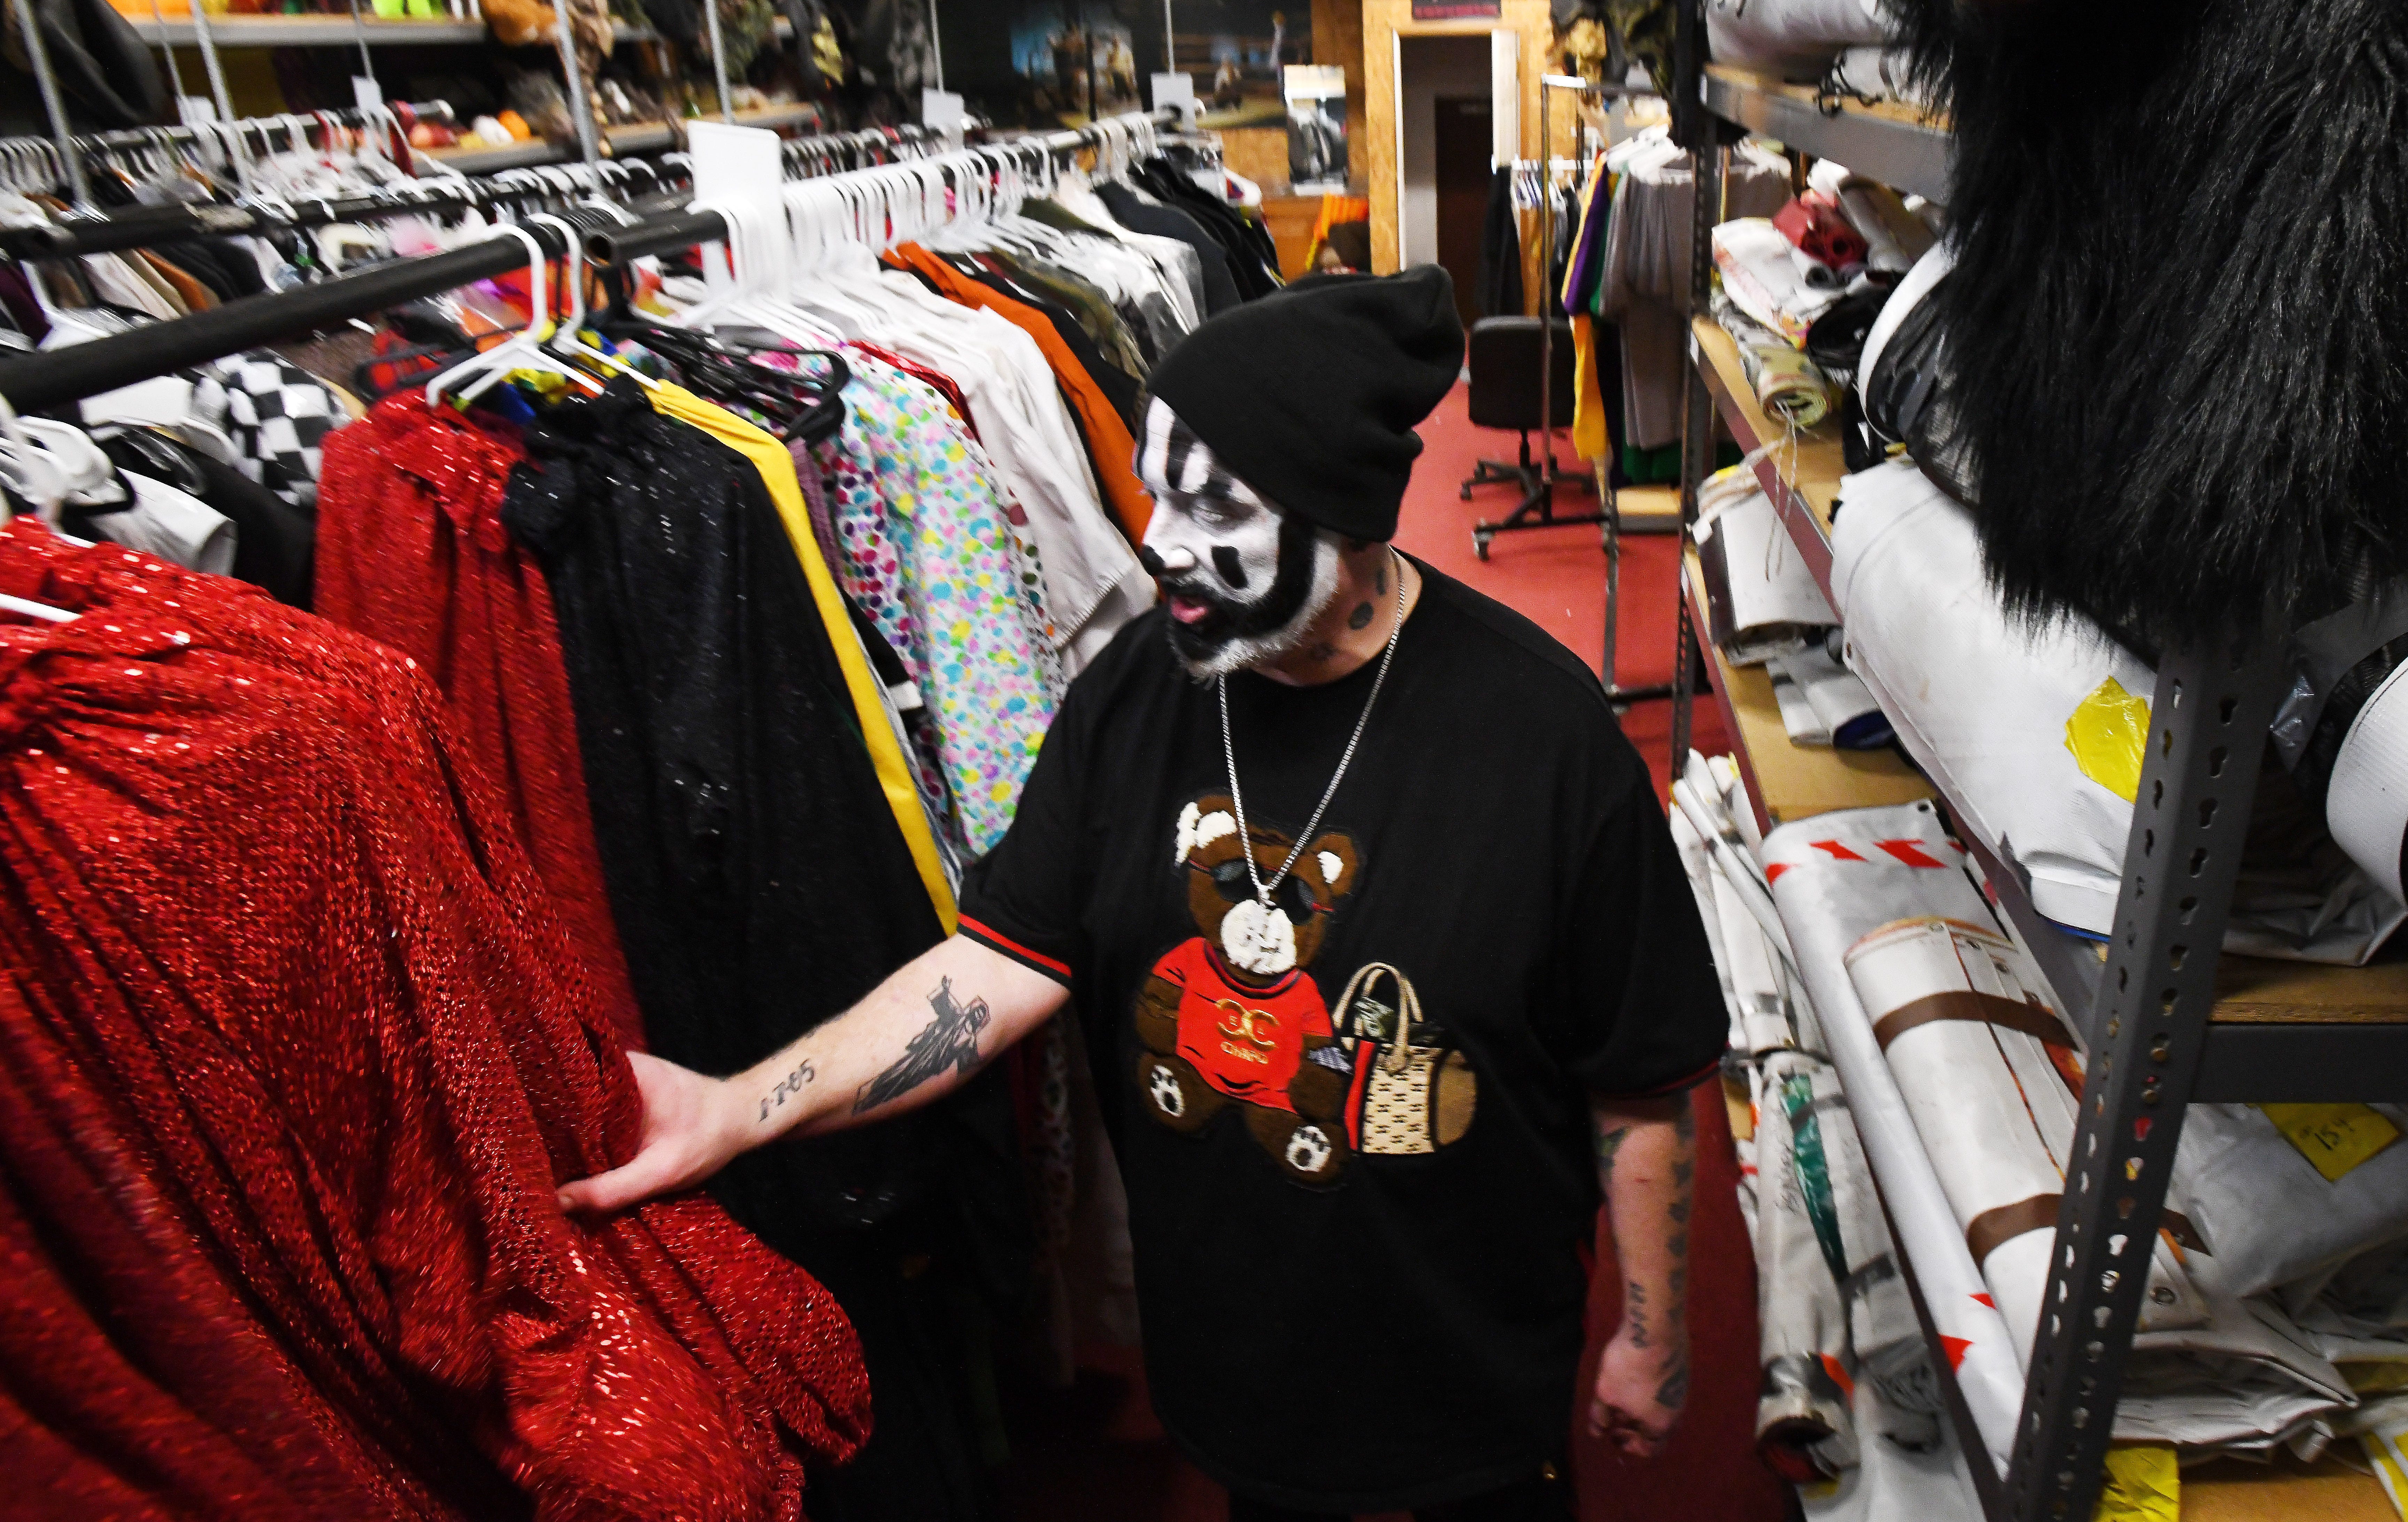 Violent J, aka Joseph Bruce of Insane Clown Posse, shows where outfits and various paraphernalia from their elaborate shows and tours are stored.